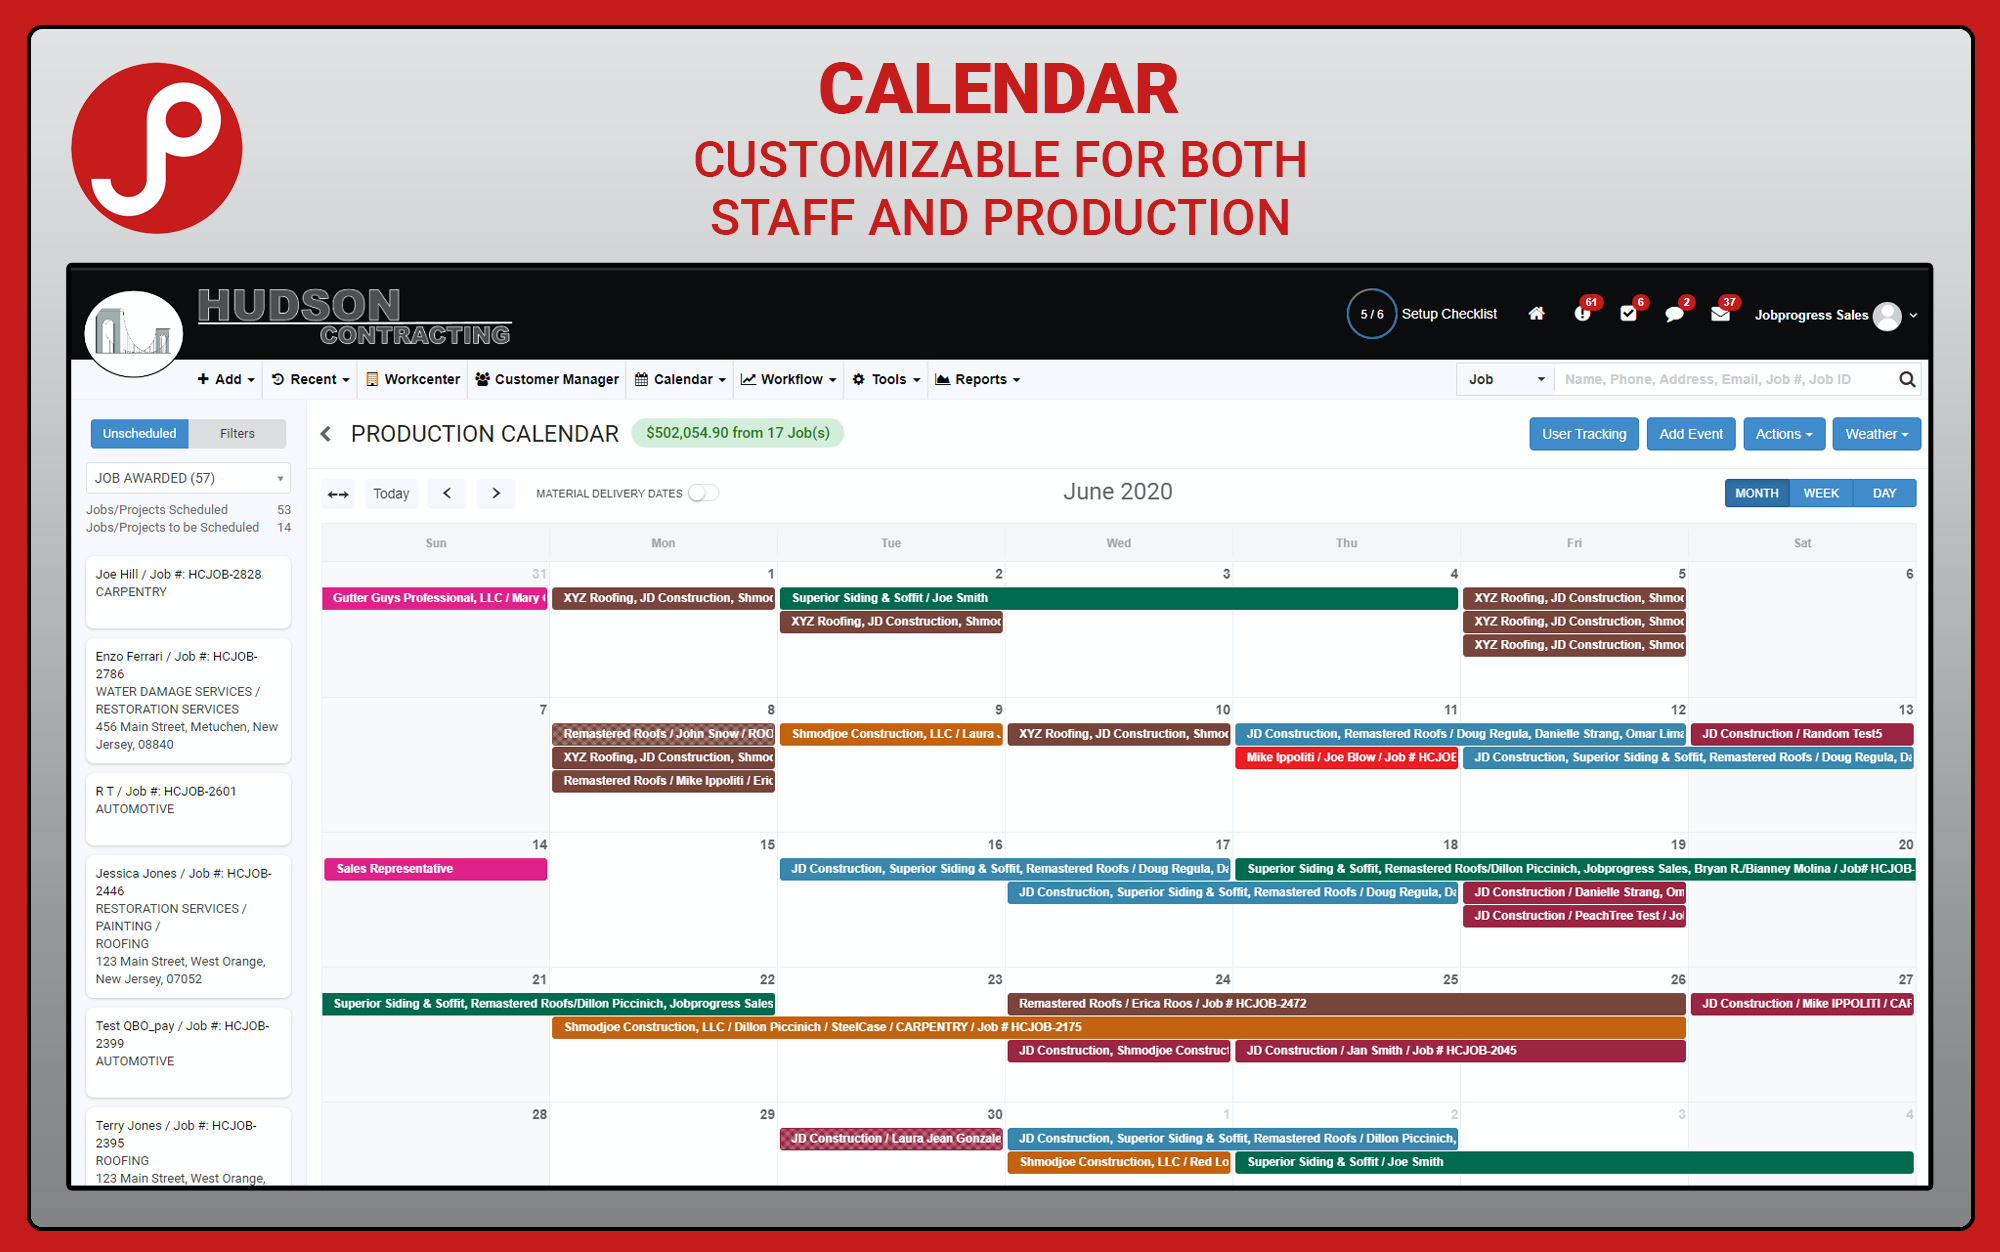 JOBPROGRESS Software - Use both the Staff Calendar and the Production Calendar to organize and color code your upcoming activity.